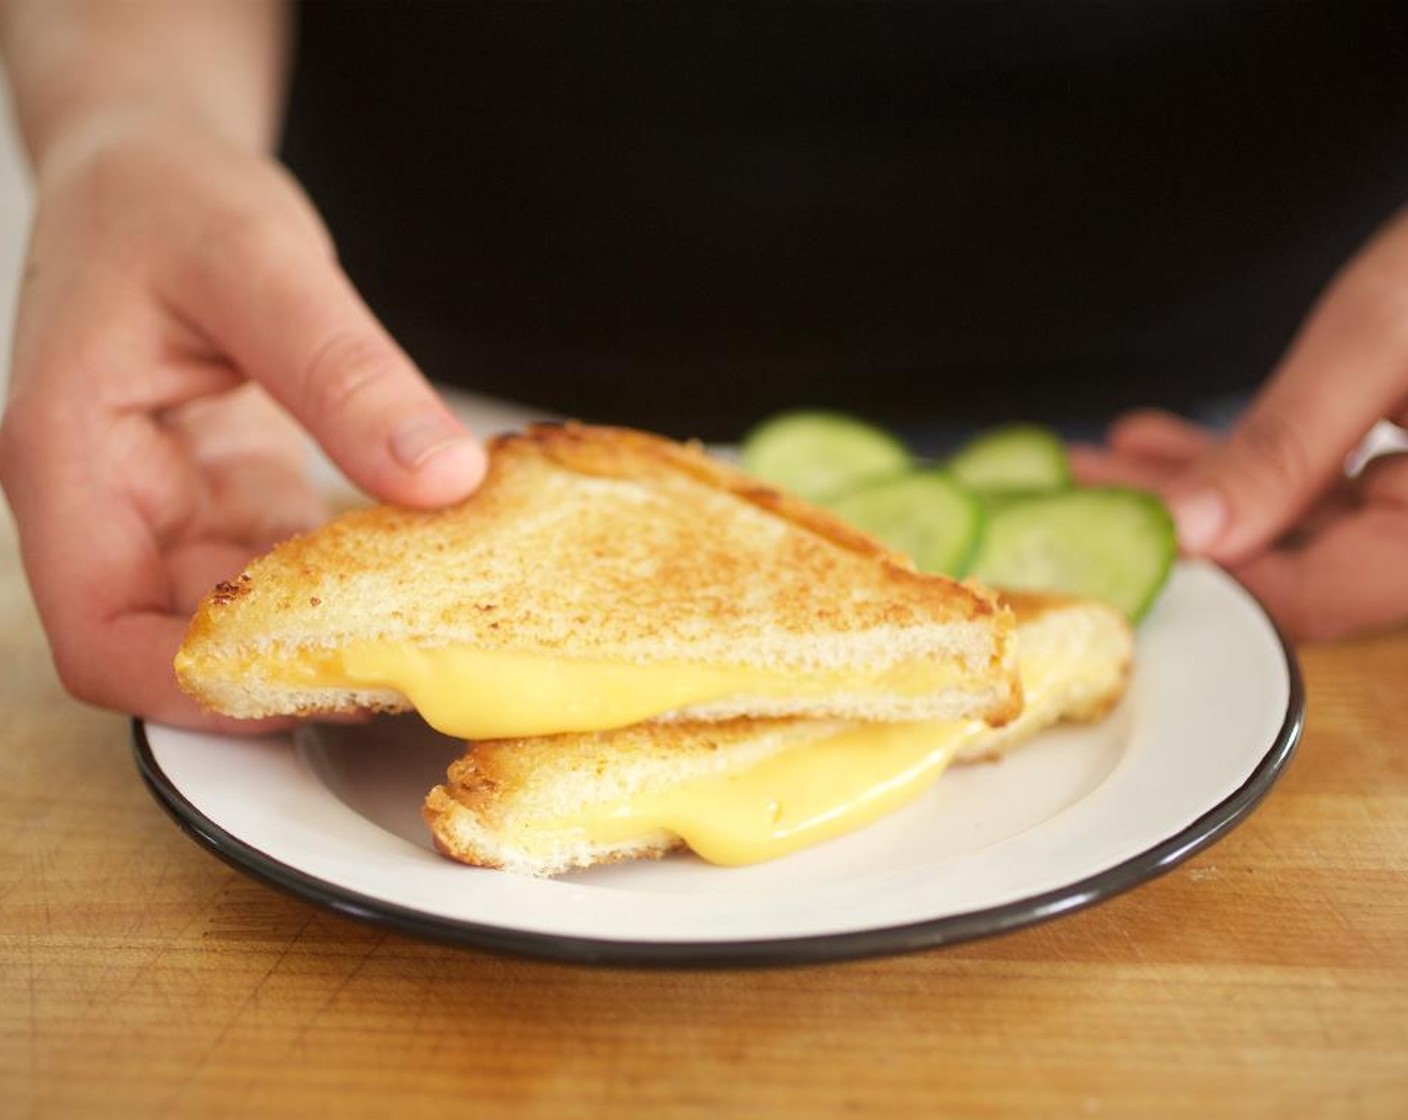 step 8 On two plates, plate the grilled cheese in the middle and place pickled cucumbers on the side. Serve and enjoy!